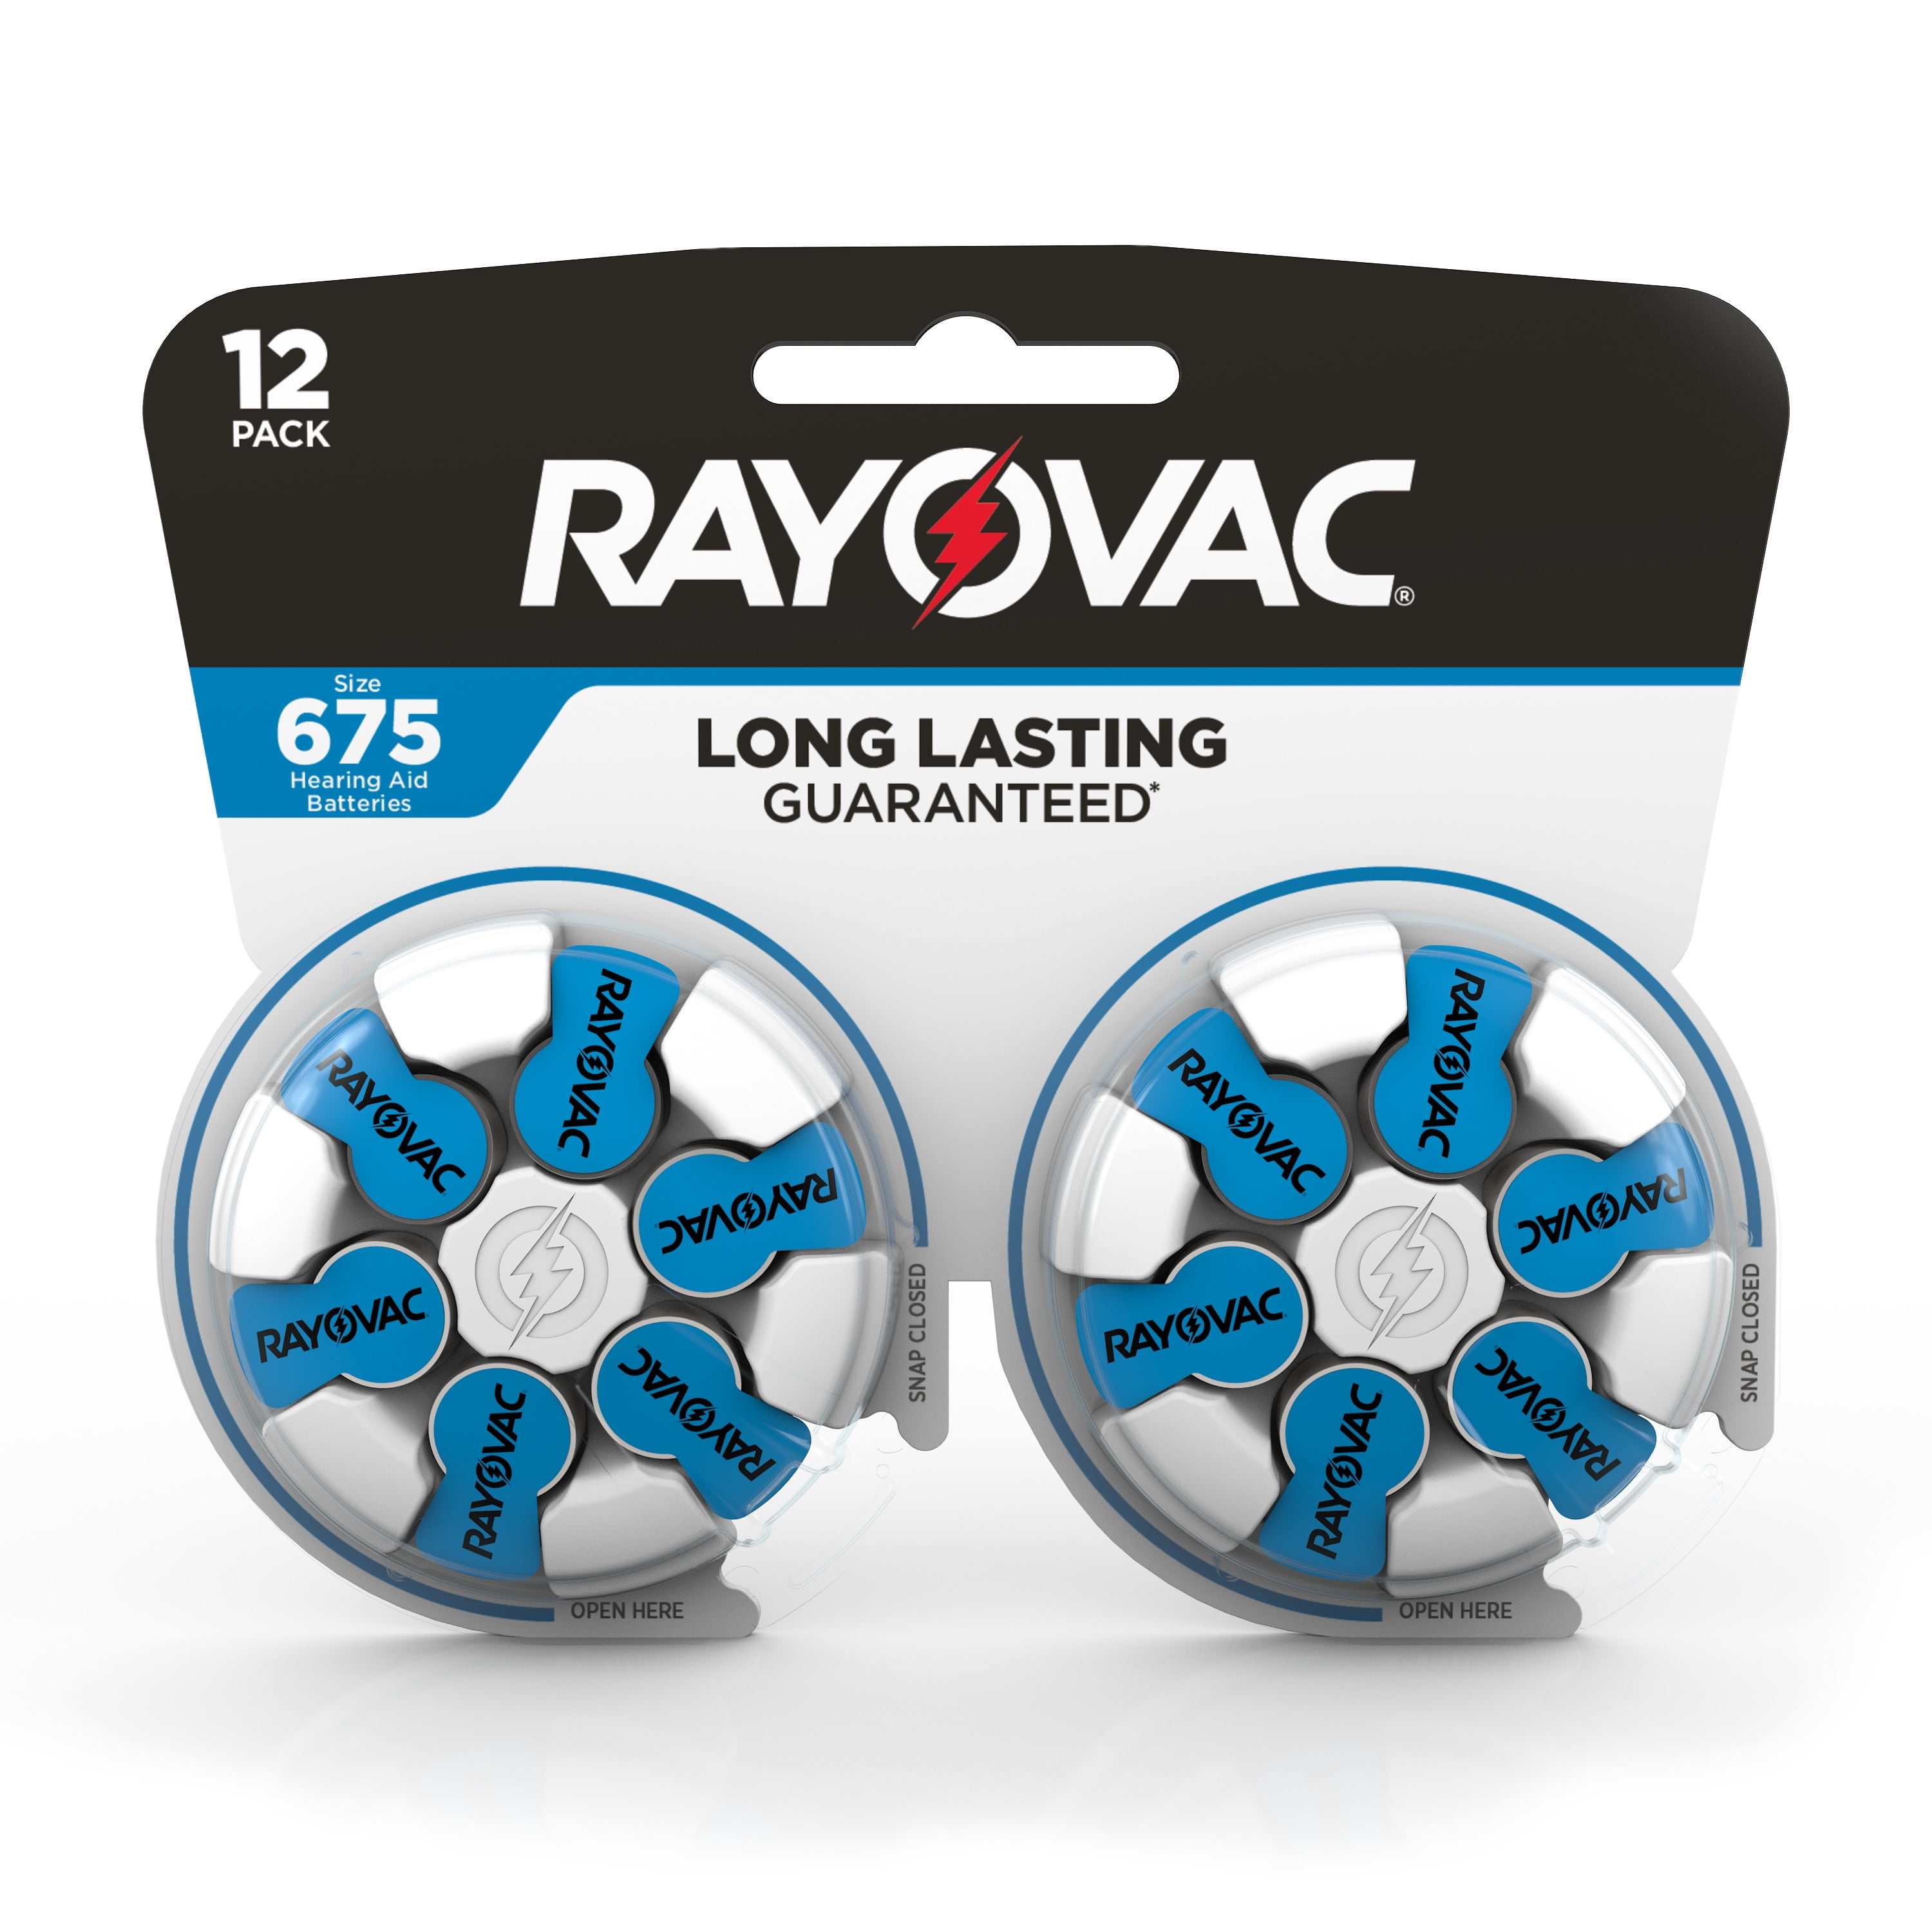 Rayovac Size 675 Hearing Aid Batteries (12 Pack), 675 Batteries